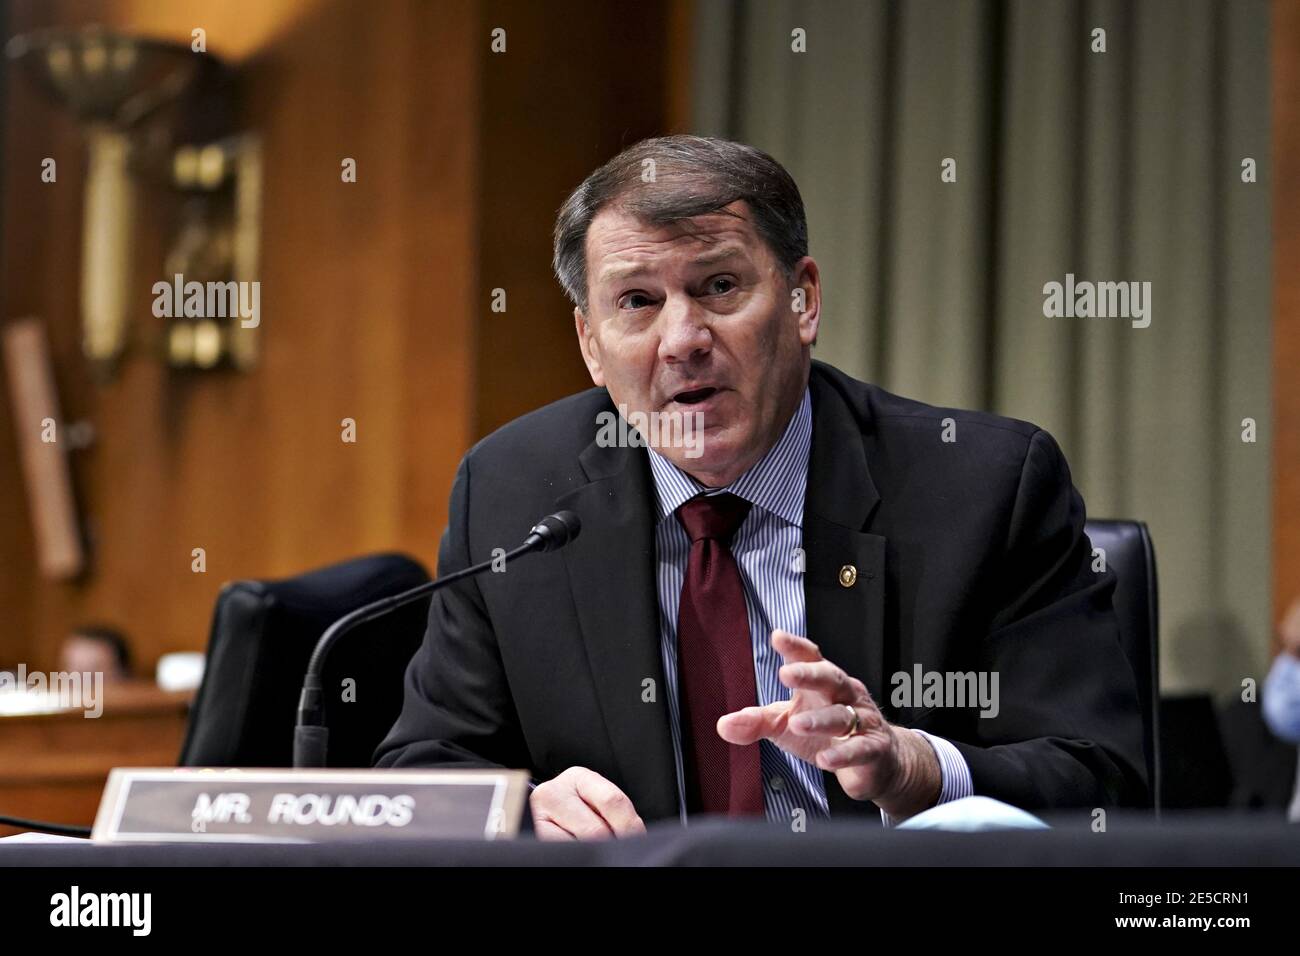 Washington, United States. 27th Jan, 2021. Senator Mike Rounds, a Republican from South Dakota, speaks during a Senate Veterans' Affairs Committee confirmation hearing for Denis McDonough, U.S. secretary of Veterans Affairs (VA) nominee for U.S. President Joe Biden, in Washington, DC on Wednesday, January 27, 2021. As Barack Obama's chief of staff, McDonough oversaw the VA's overhaul in response to its 2014 wait-time scandal and previously served as a deputy national security adviser. Photo by Sarah Silbiger/UPI Credit: UPI/Alamy Live News Stock Photo